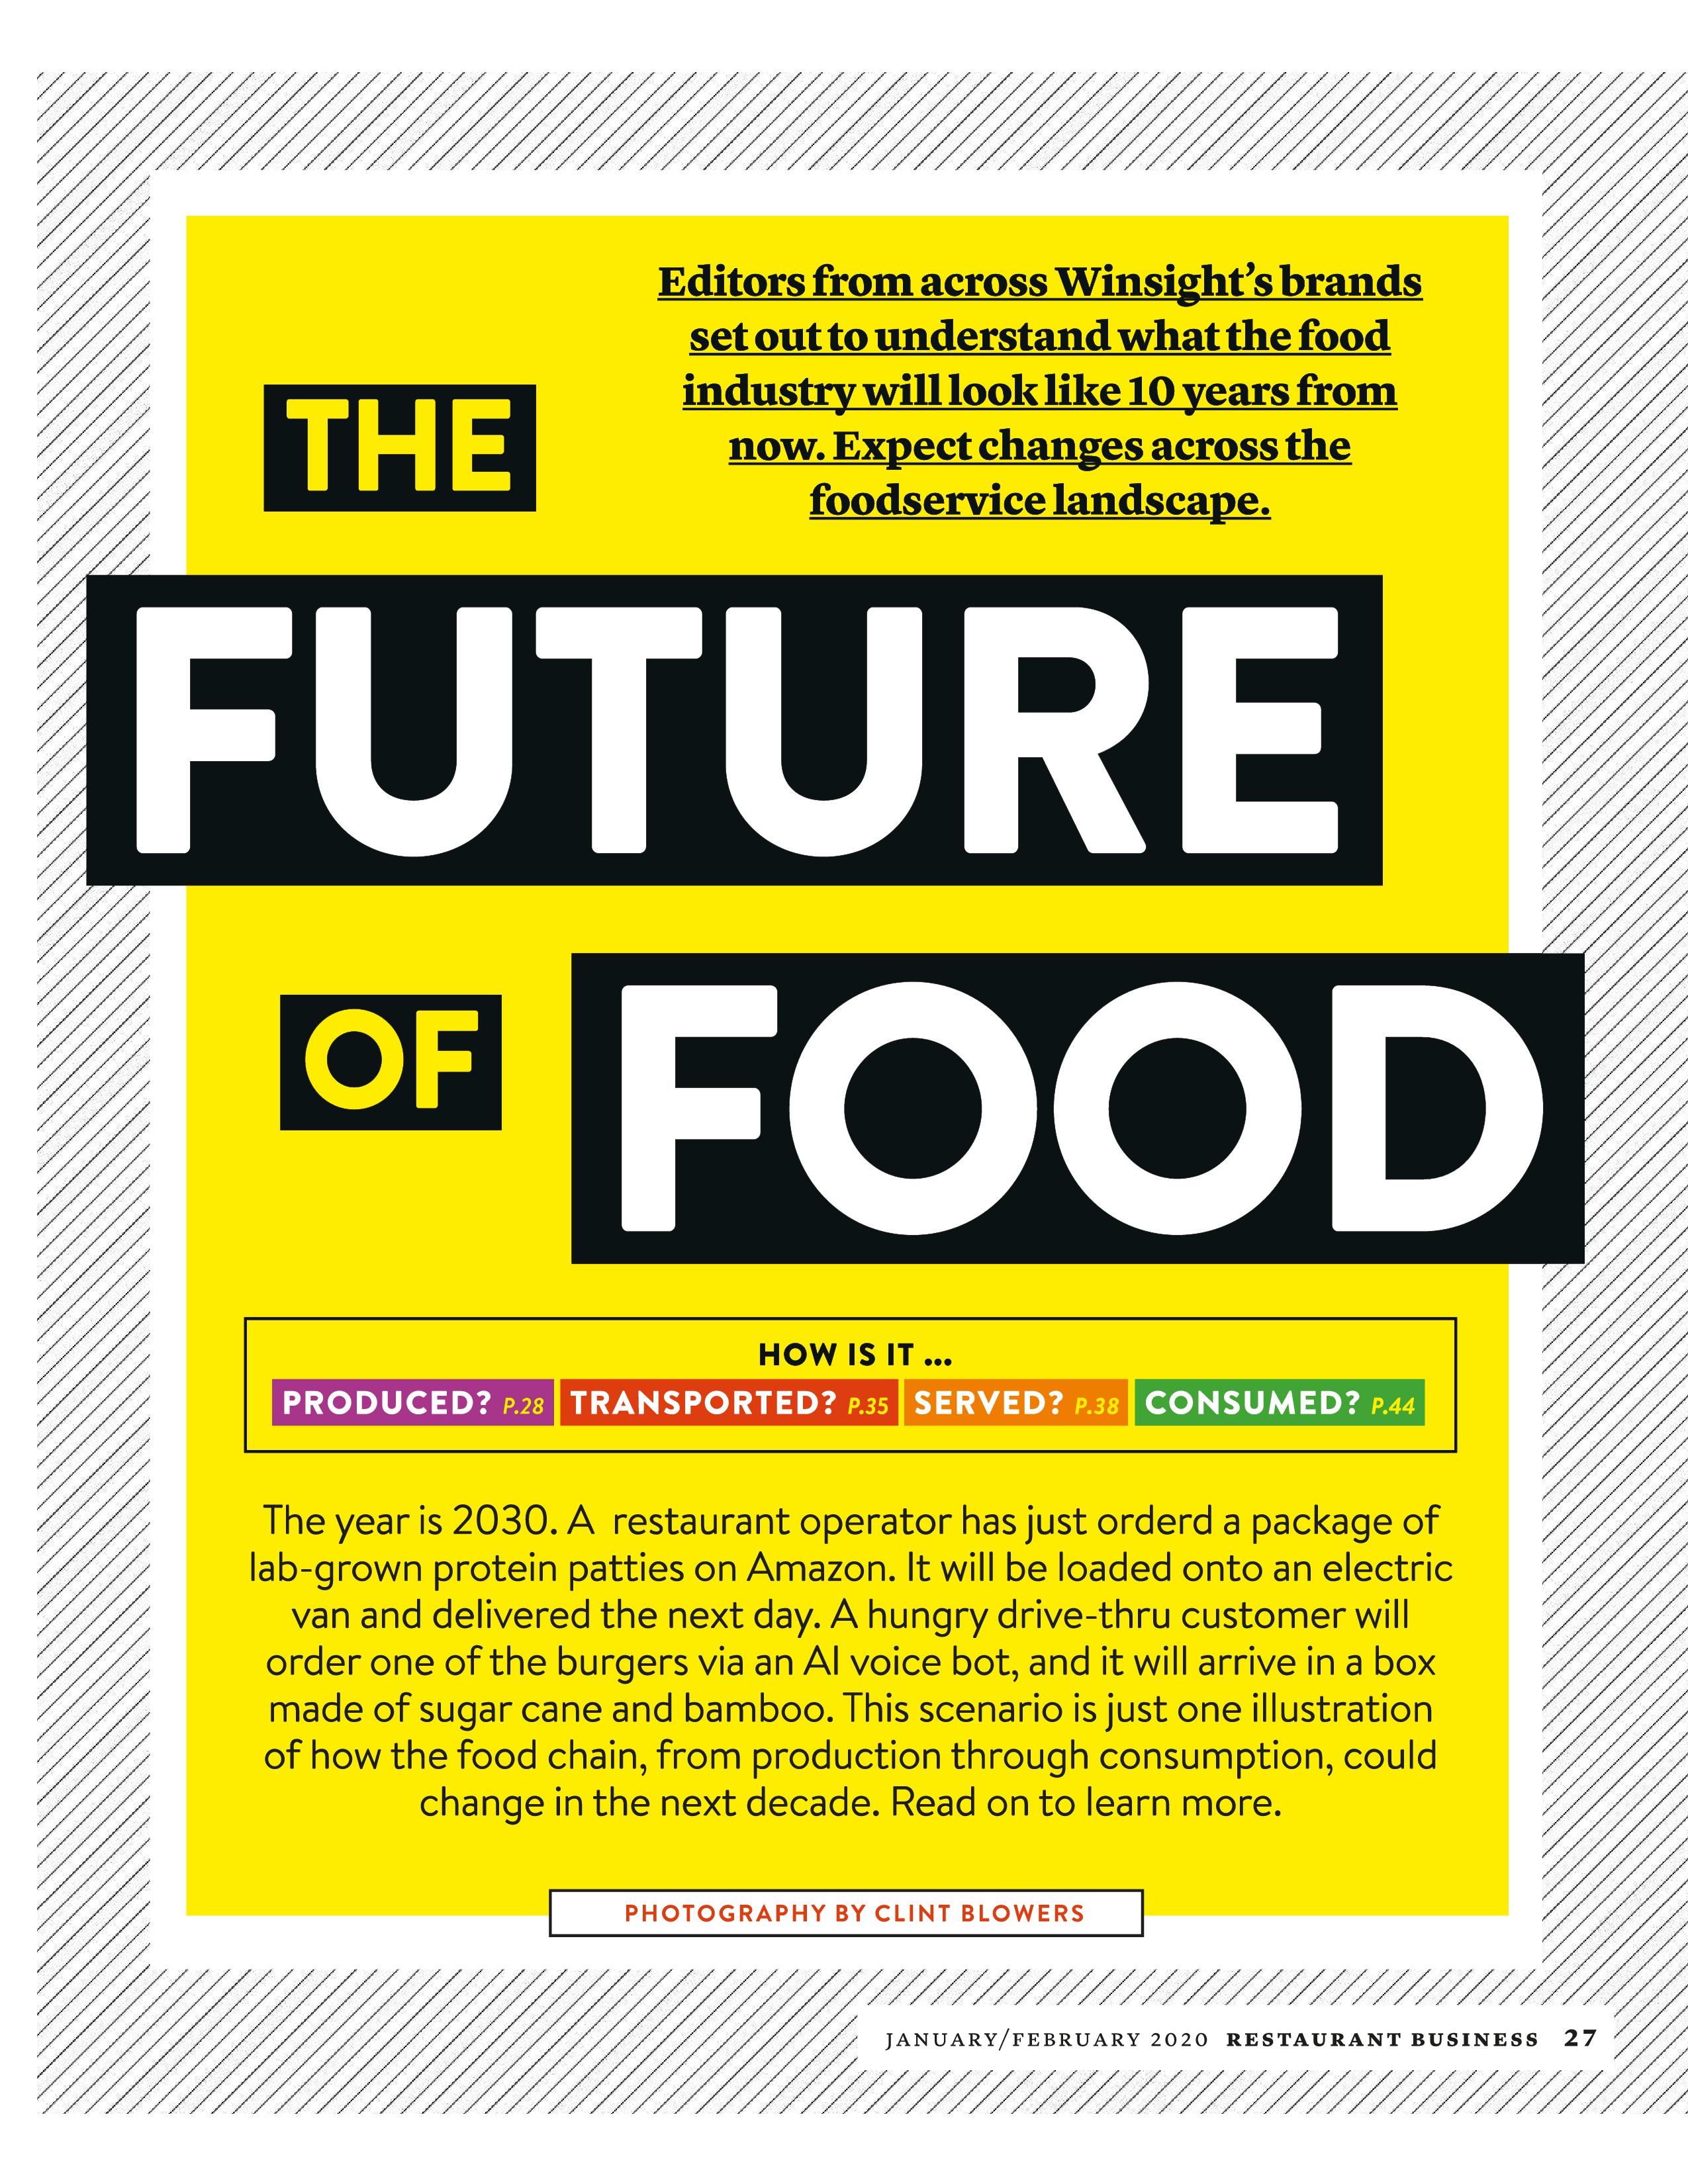 The Future Of Food Restaurant Business February 2020-page-0